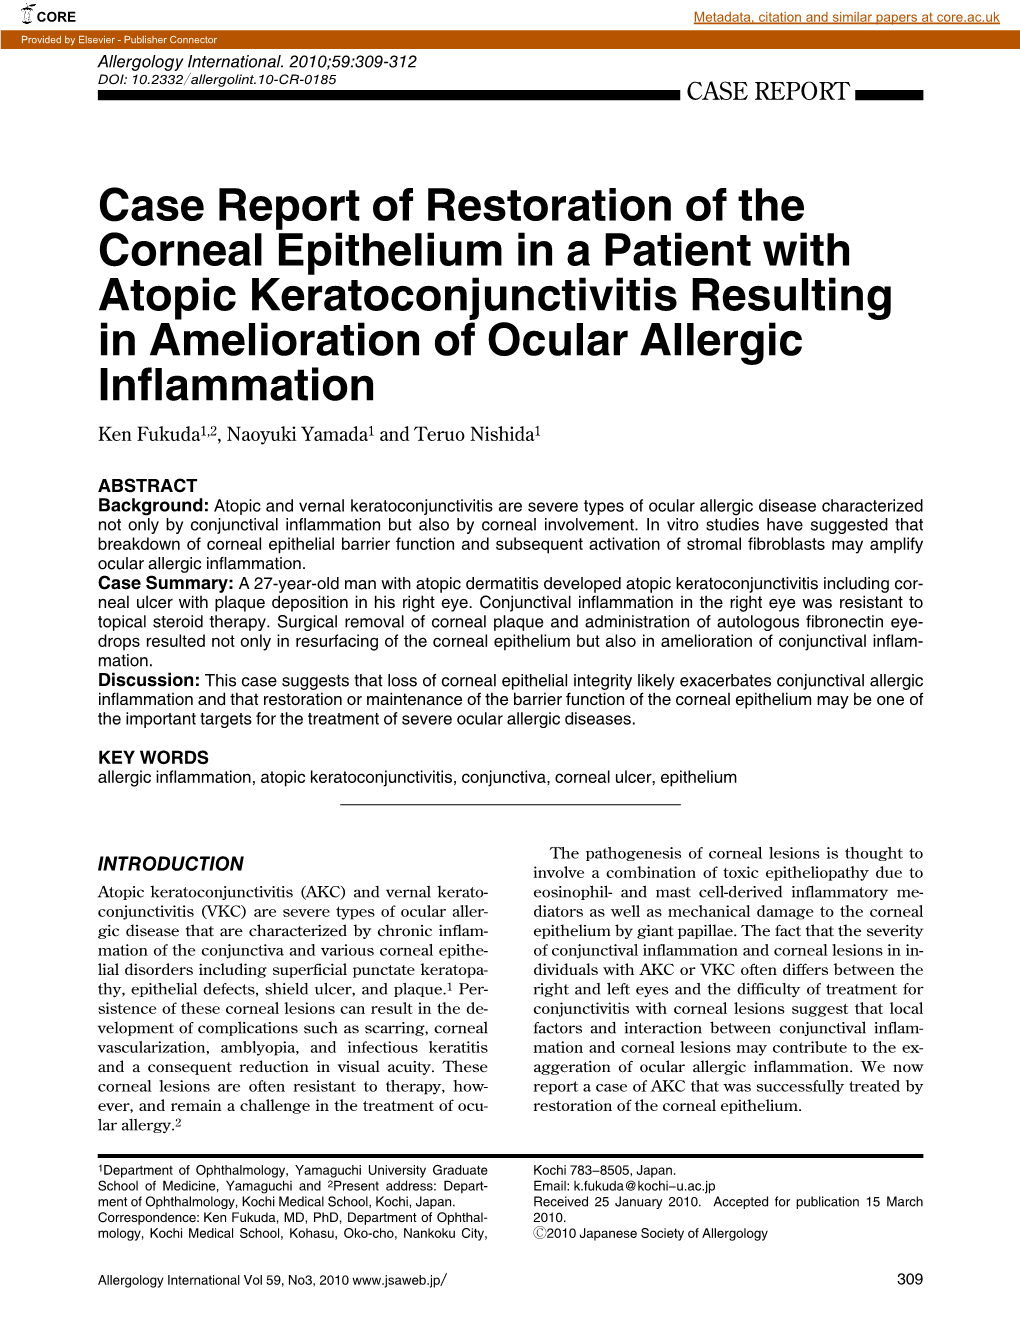 Case Report of Restoration of the Corneal Epithelium in a Patient With